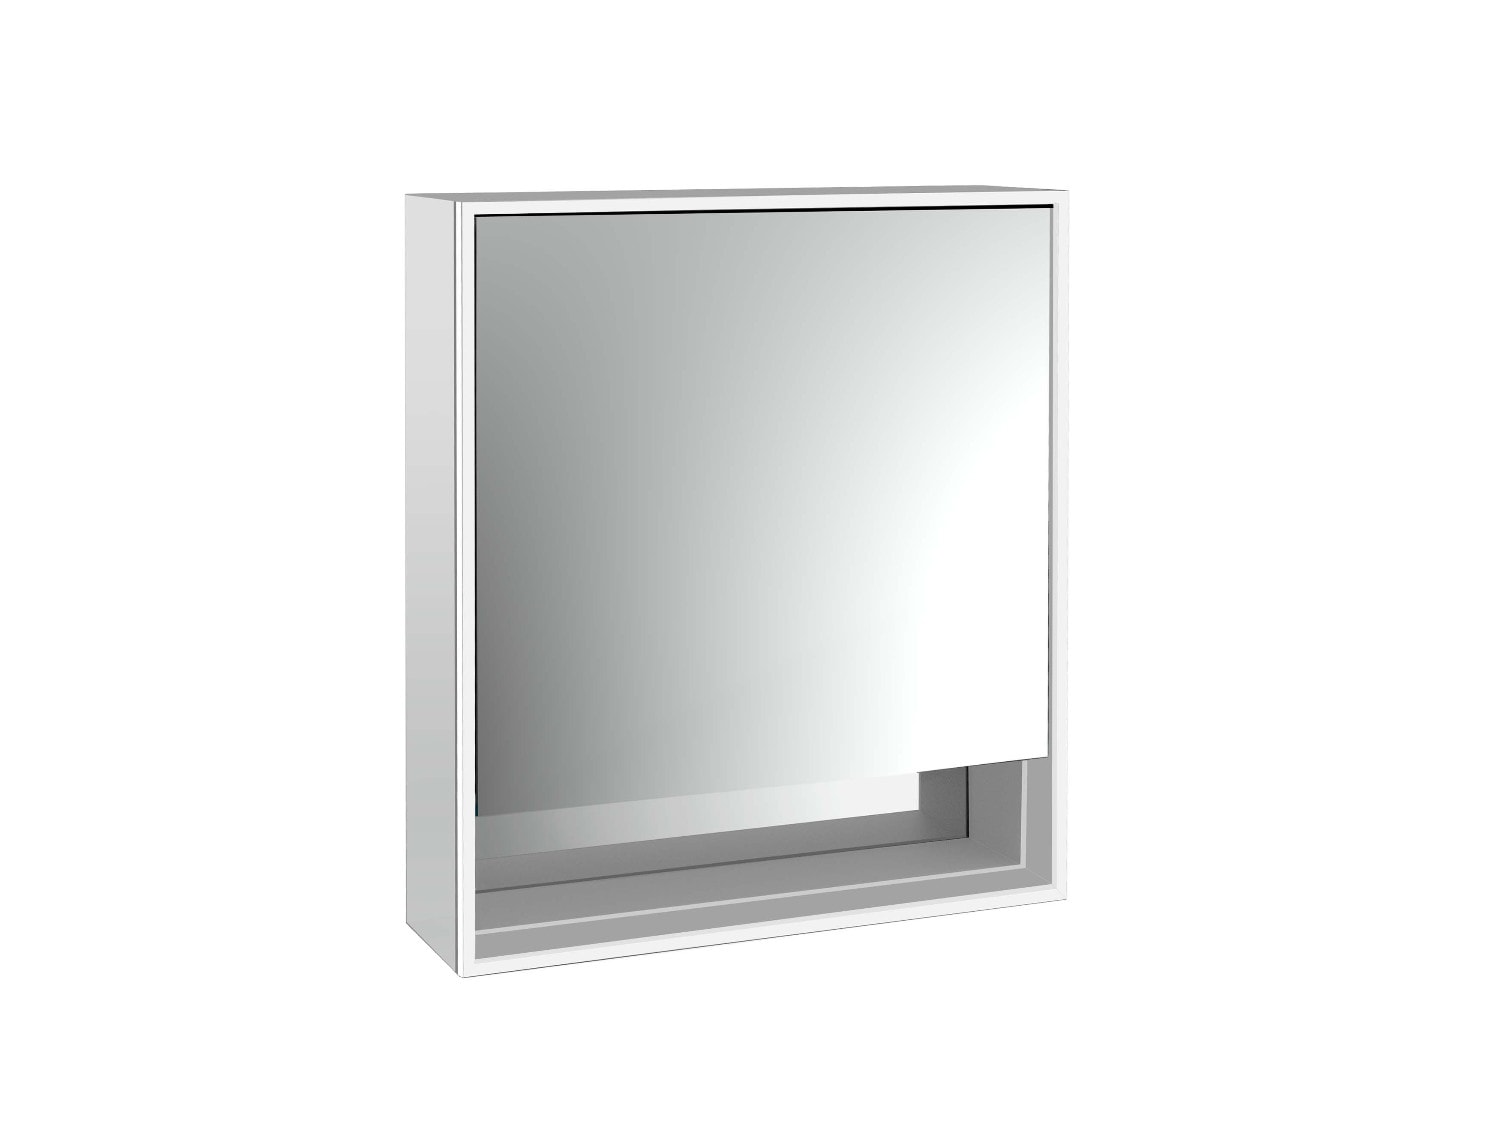 emco Illuminated mirror loft an accessible compartment, 600 mm, 1 door, wall-mounted model with mirrored side panels, IP 20. - EMCO